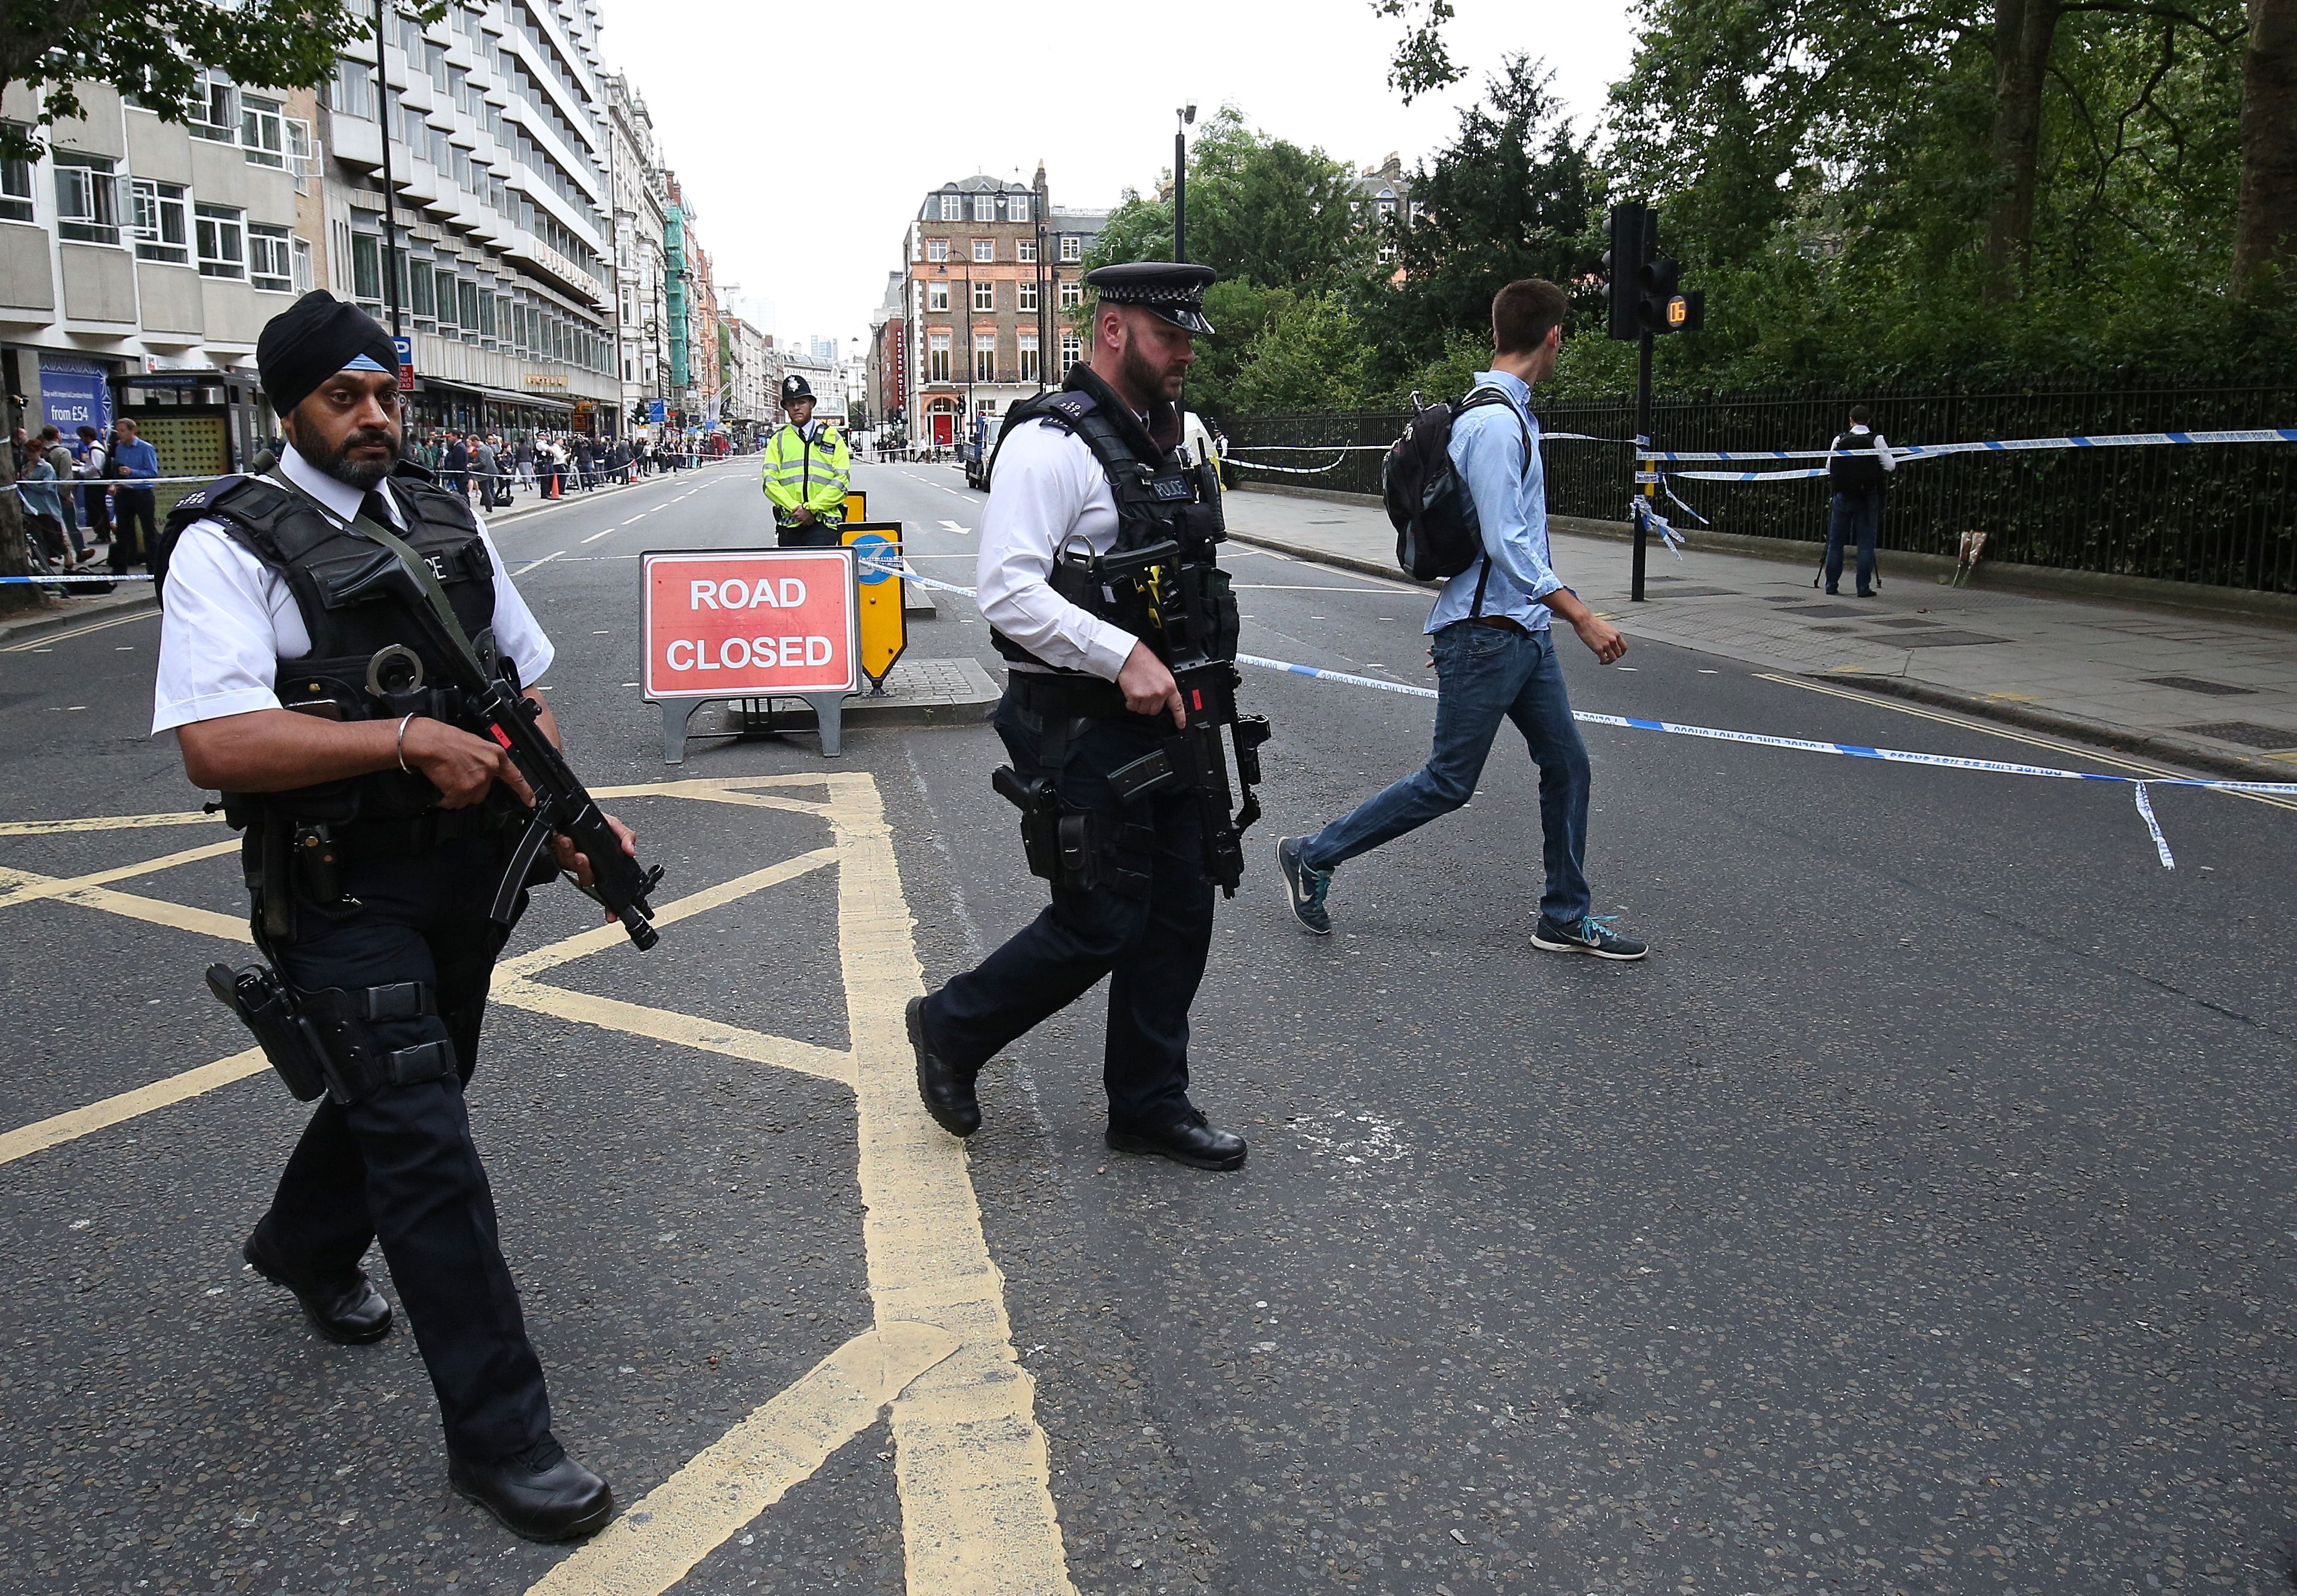 Armed police personnel walk past a crime scene in London's Russell Square on August 4, 2016. (Getty)